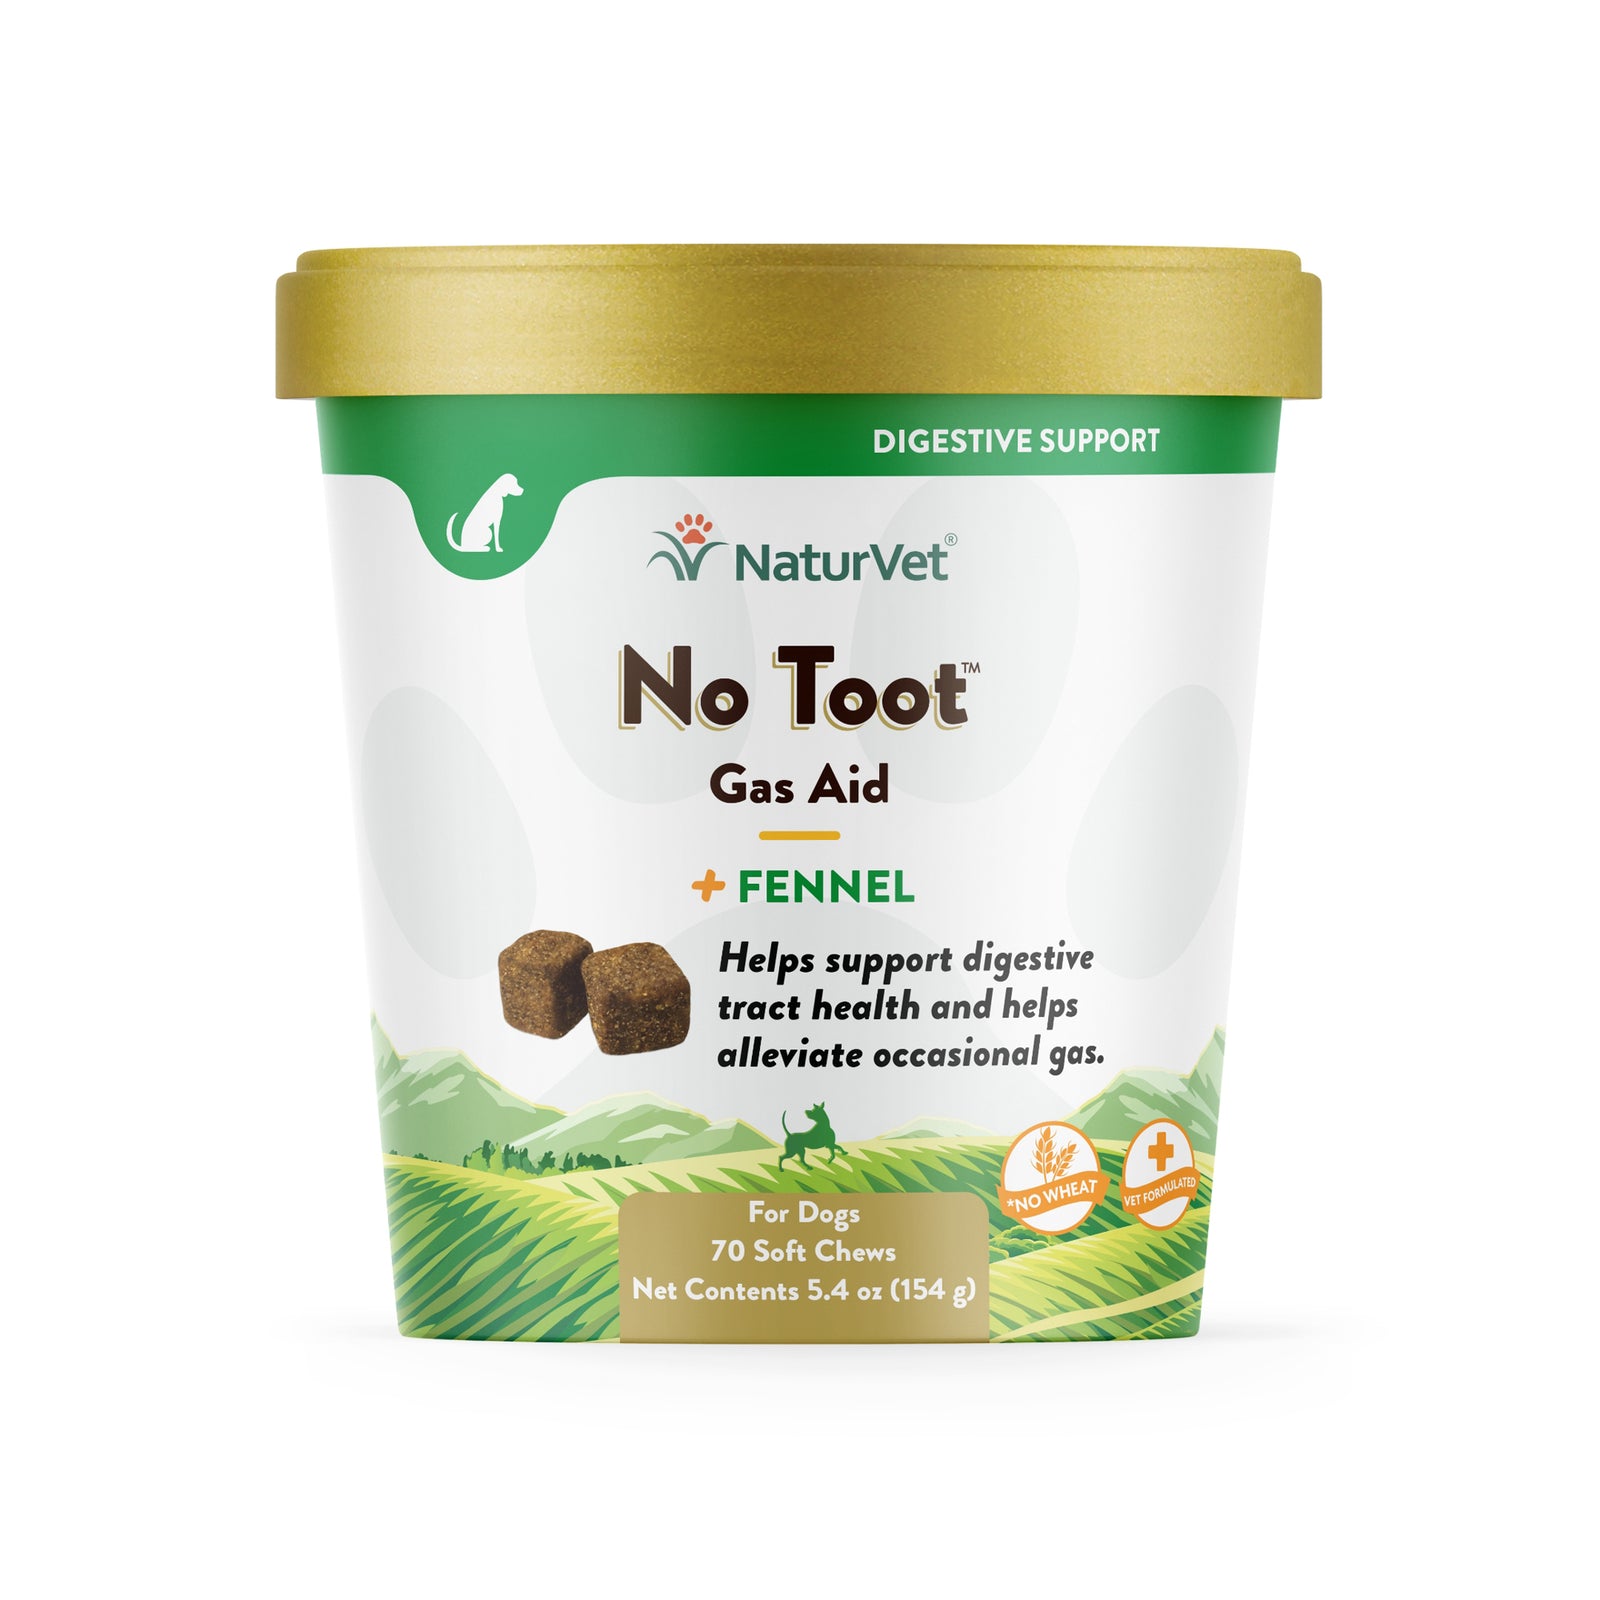 NaturVet No Toot Gas Aid Plus Fennel Soft Chews for Dogs, 70 ct